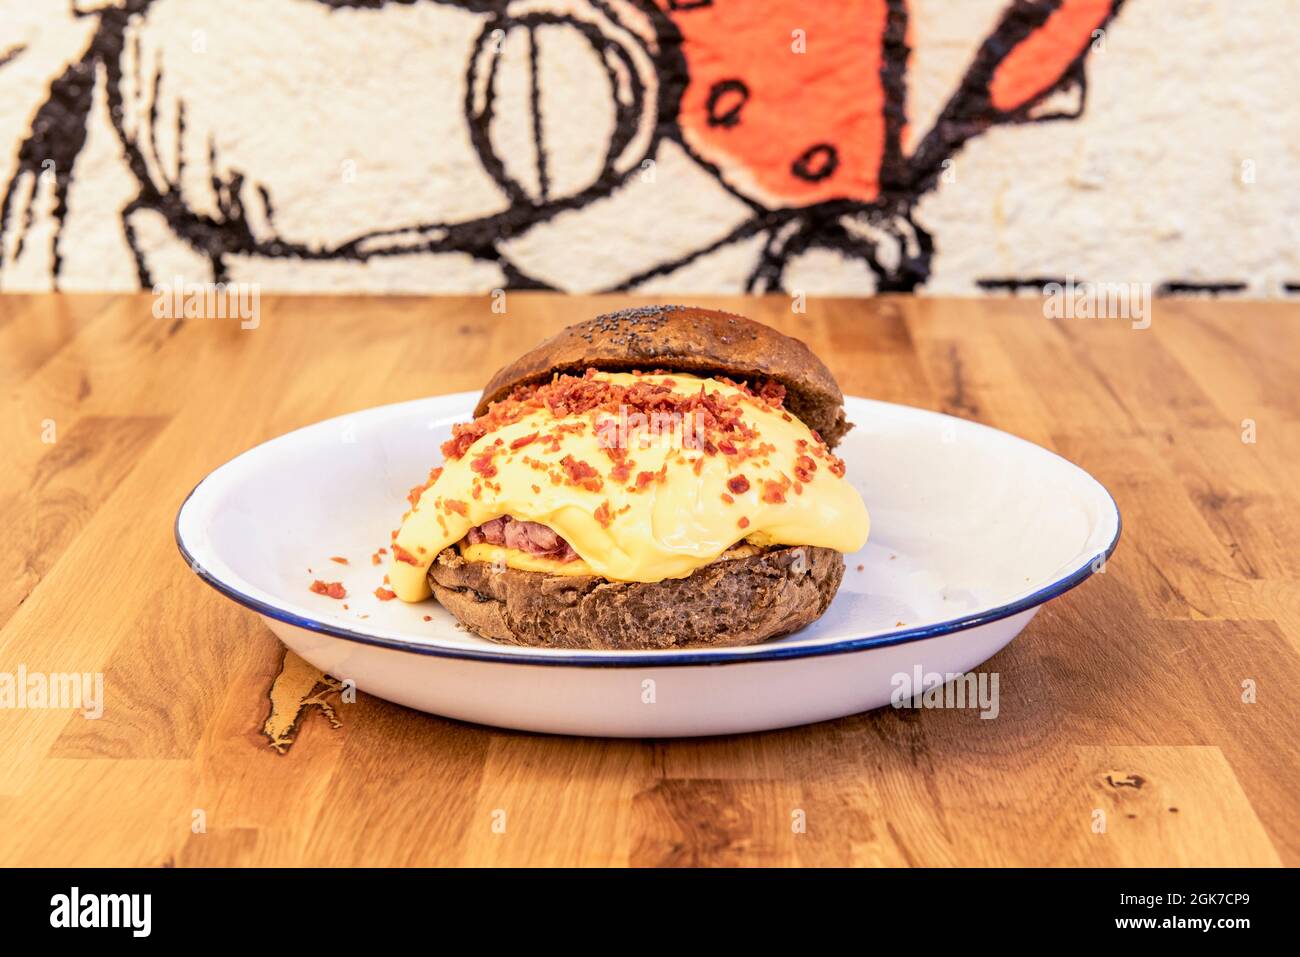 Beef burger with lots of melted cheese and crispy onion with rye bread on wooden table Stock Photo